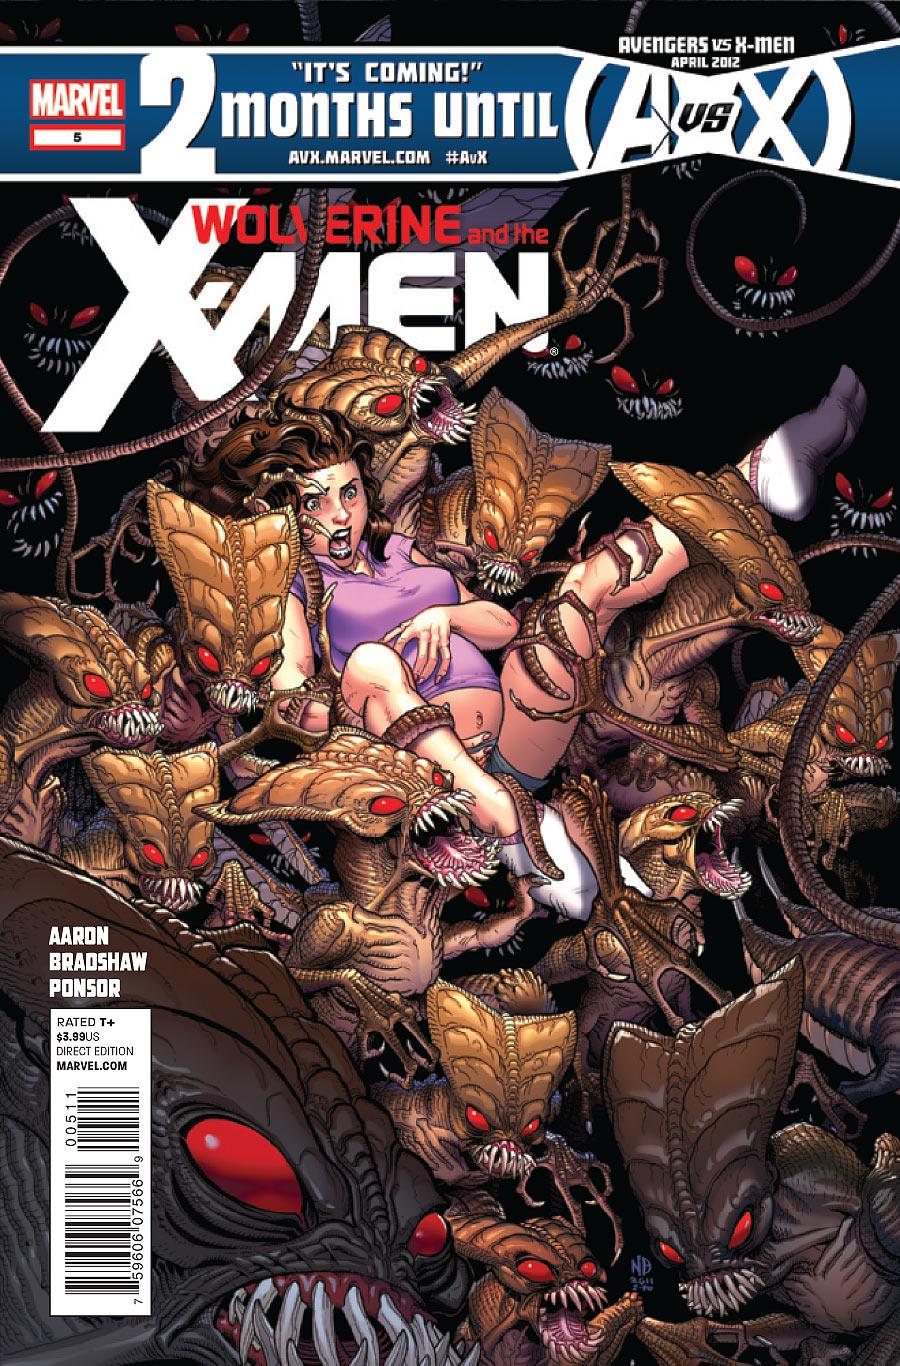 Wolverine and the X-Men Vol. 1 #5